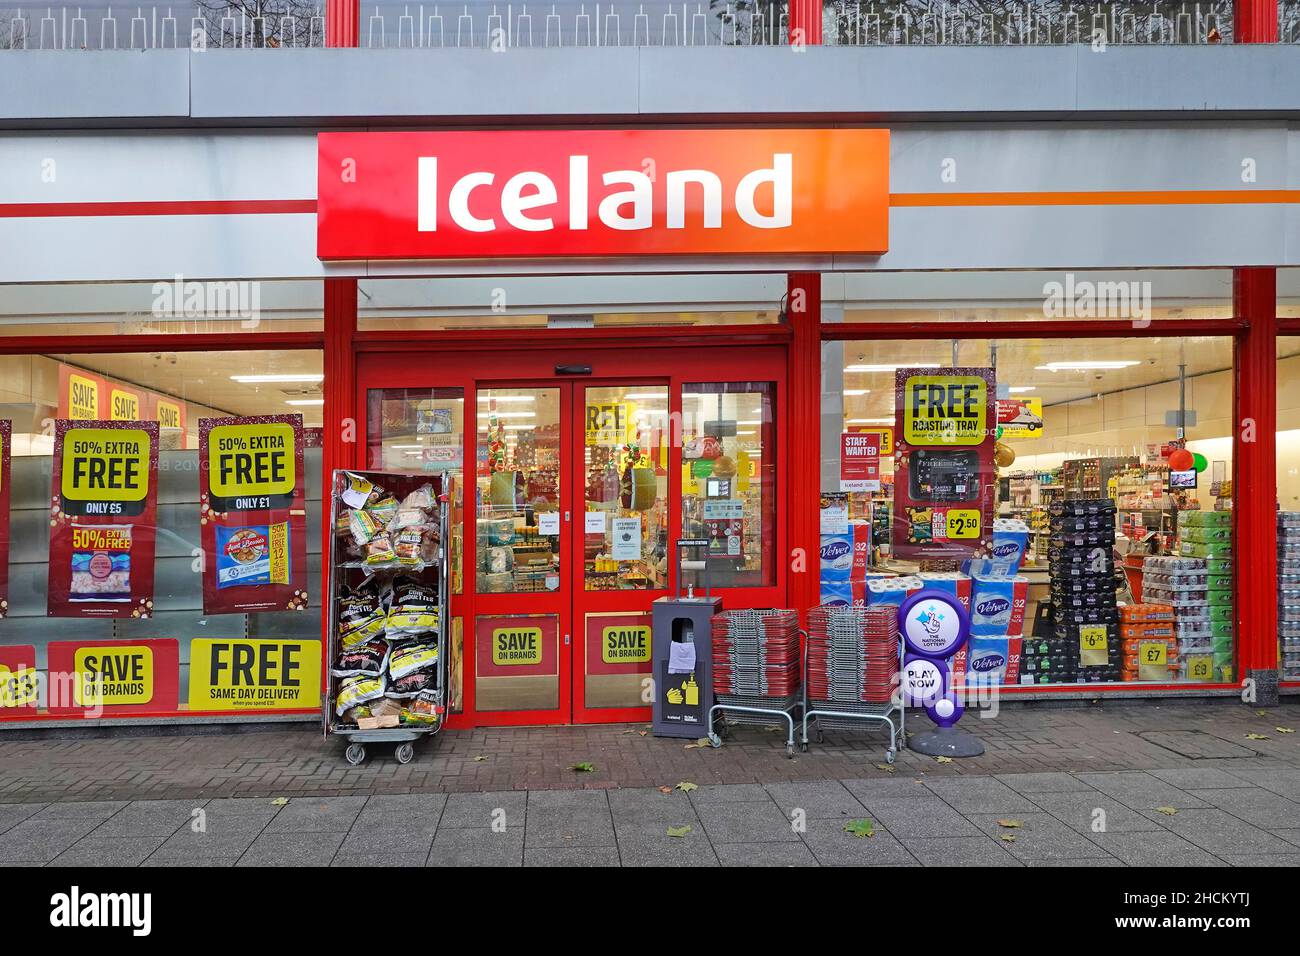 Close up Iceland Supermarket high street shop front window & entrance doors to frozen food grocery business in retail store premises Essex England UK Stock Photo